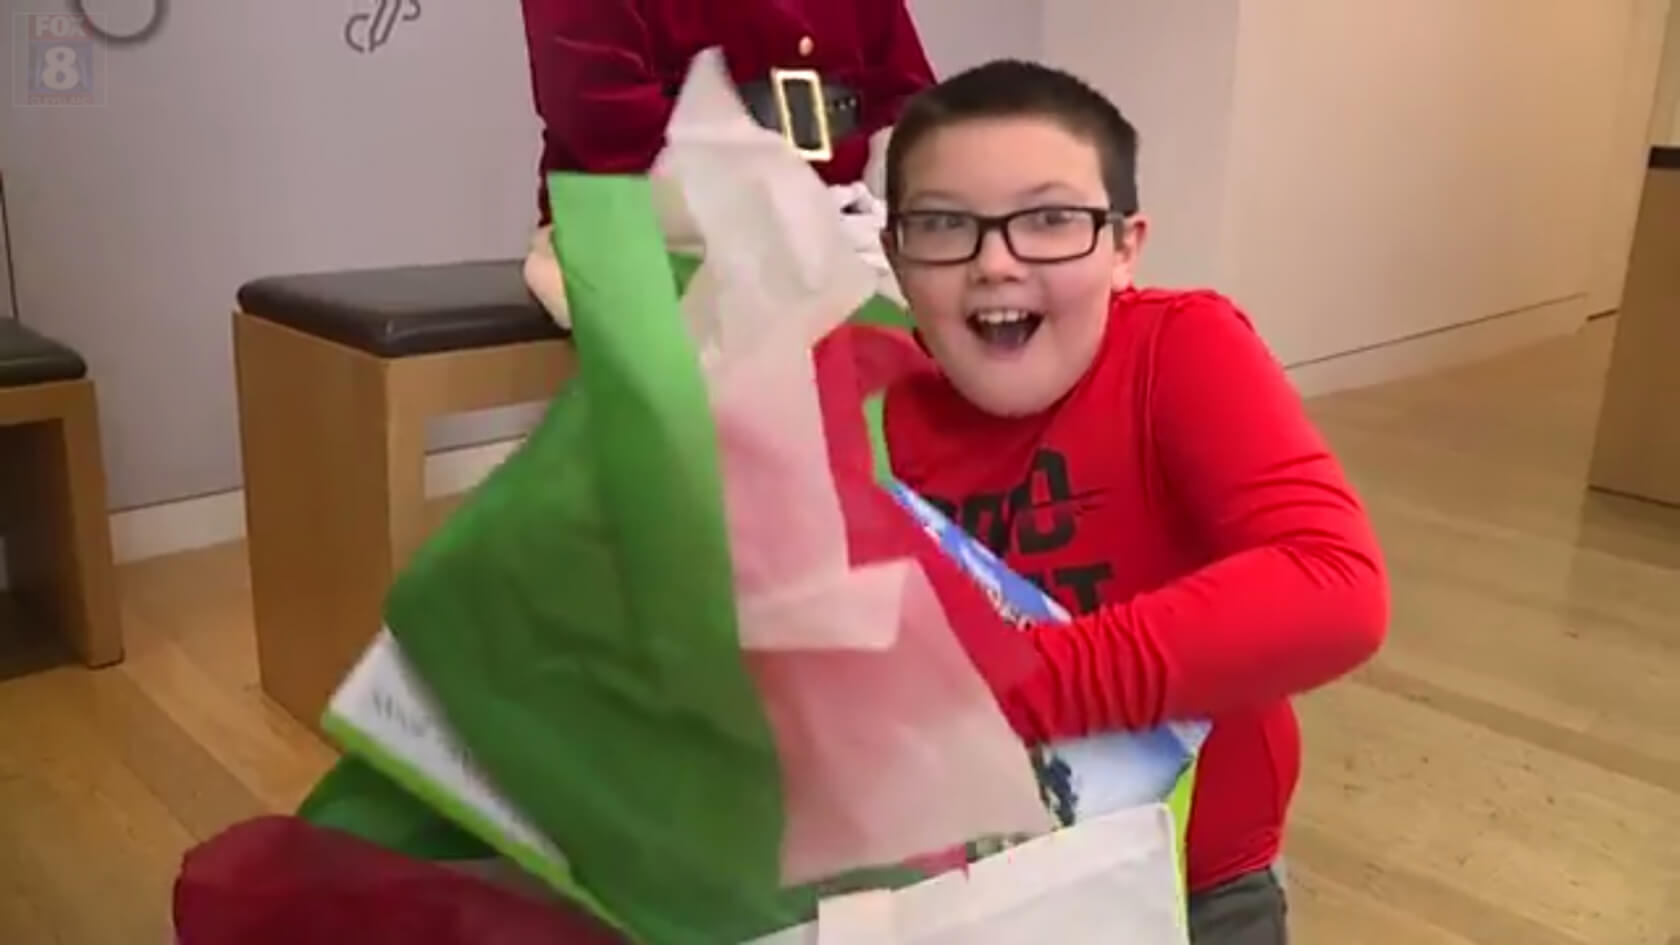 Boy gives up his Xbox One present to help the homeless; Microsoft surprises him with new console and gifts